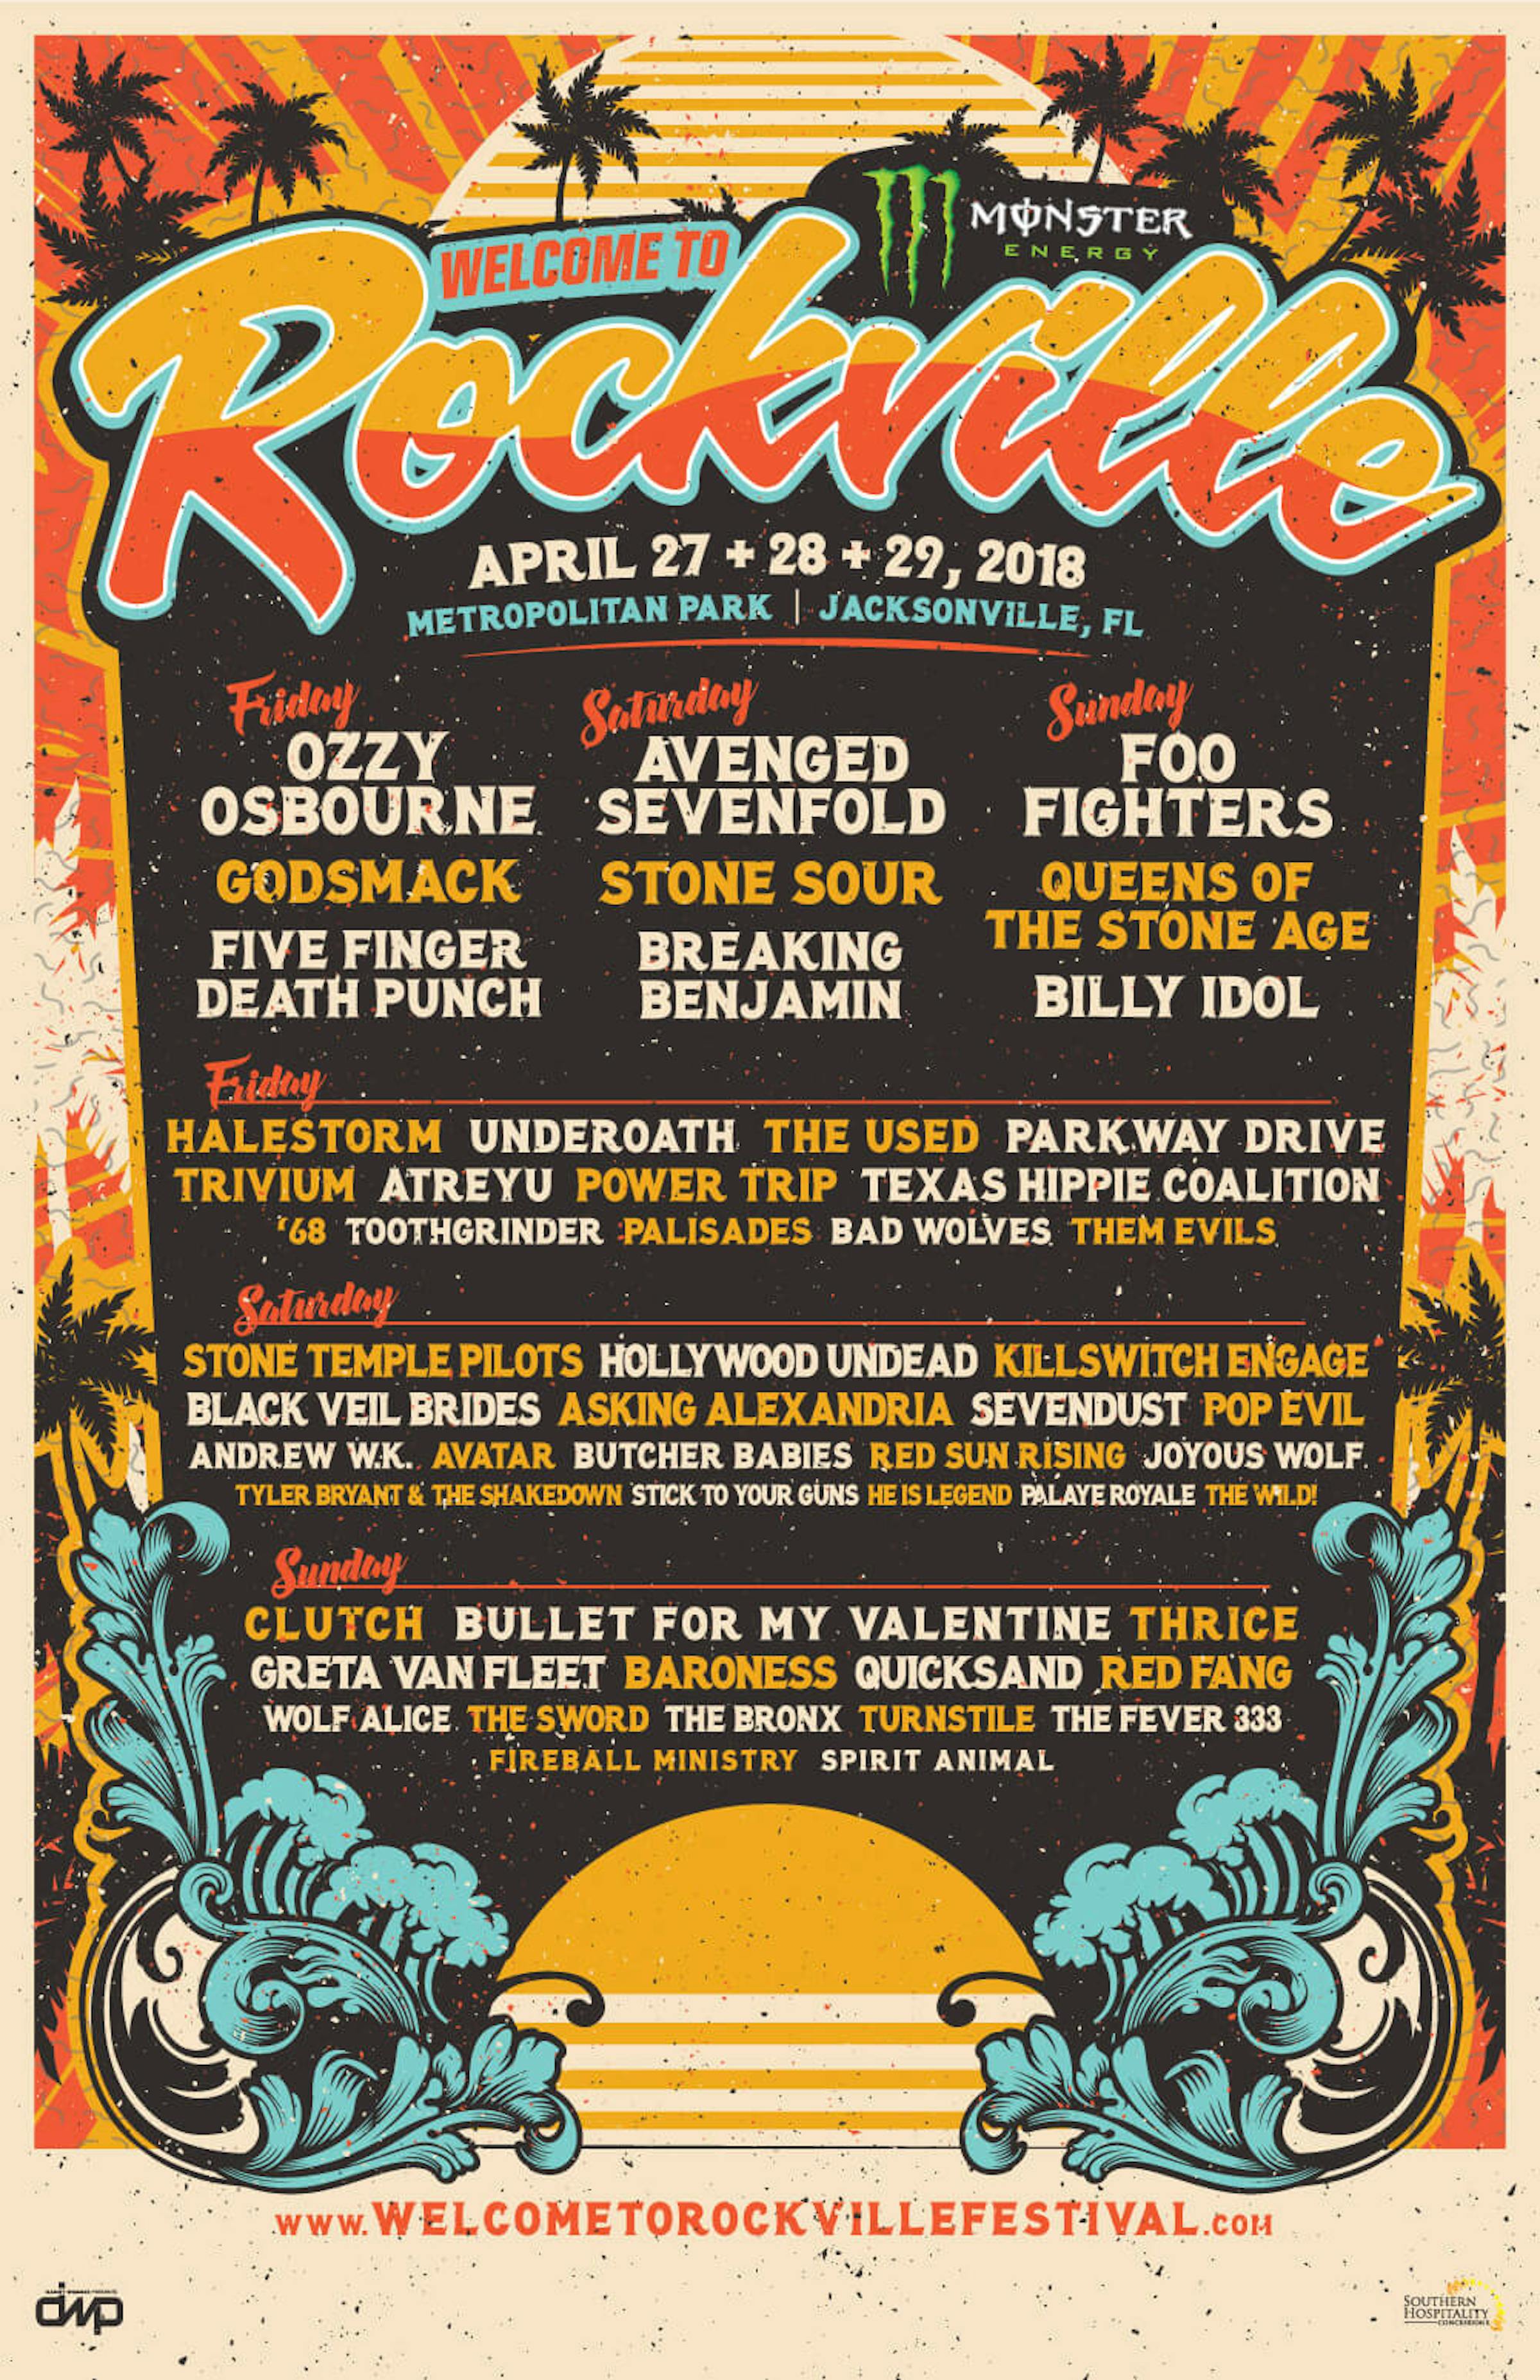 Welcome To Rockville 2018 Stage Times Announced — Kerrang!